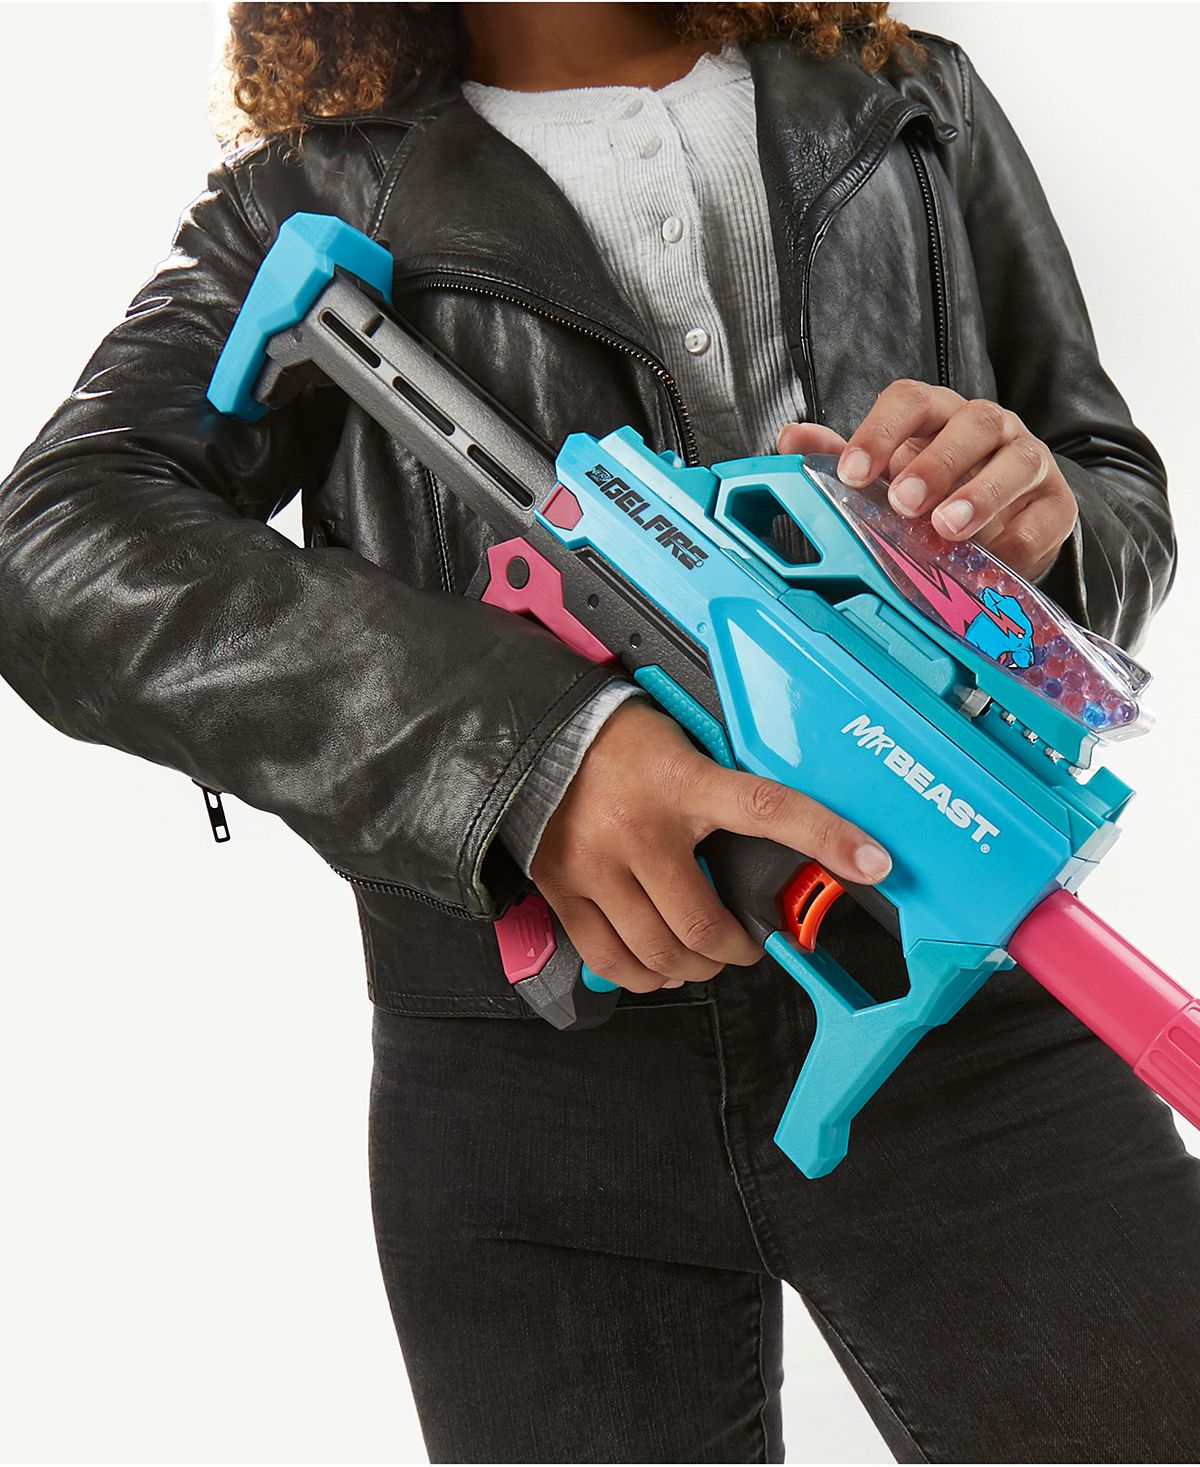 Nerf Pro Gelfire MrBeast High-Capacity Blaster with Hydrated Rounds